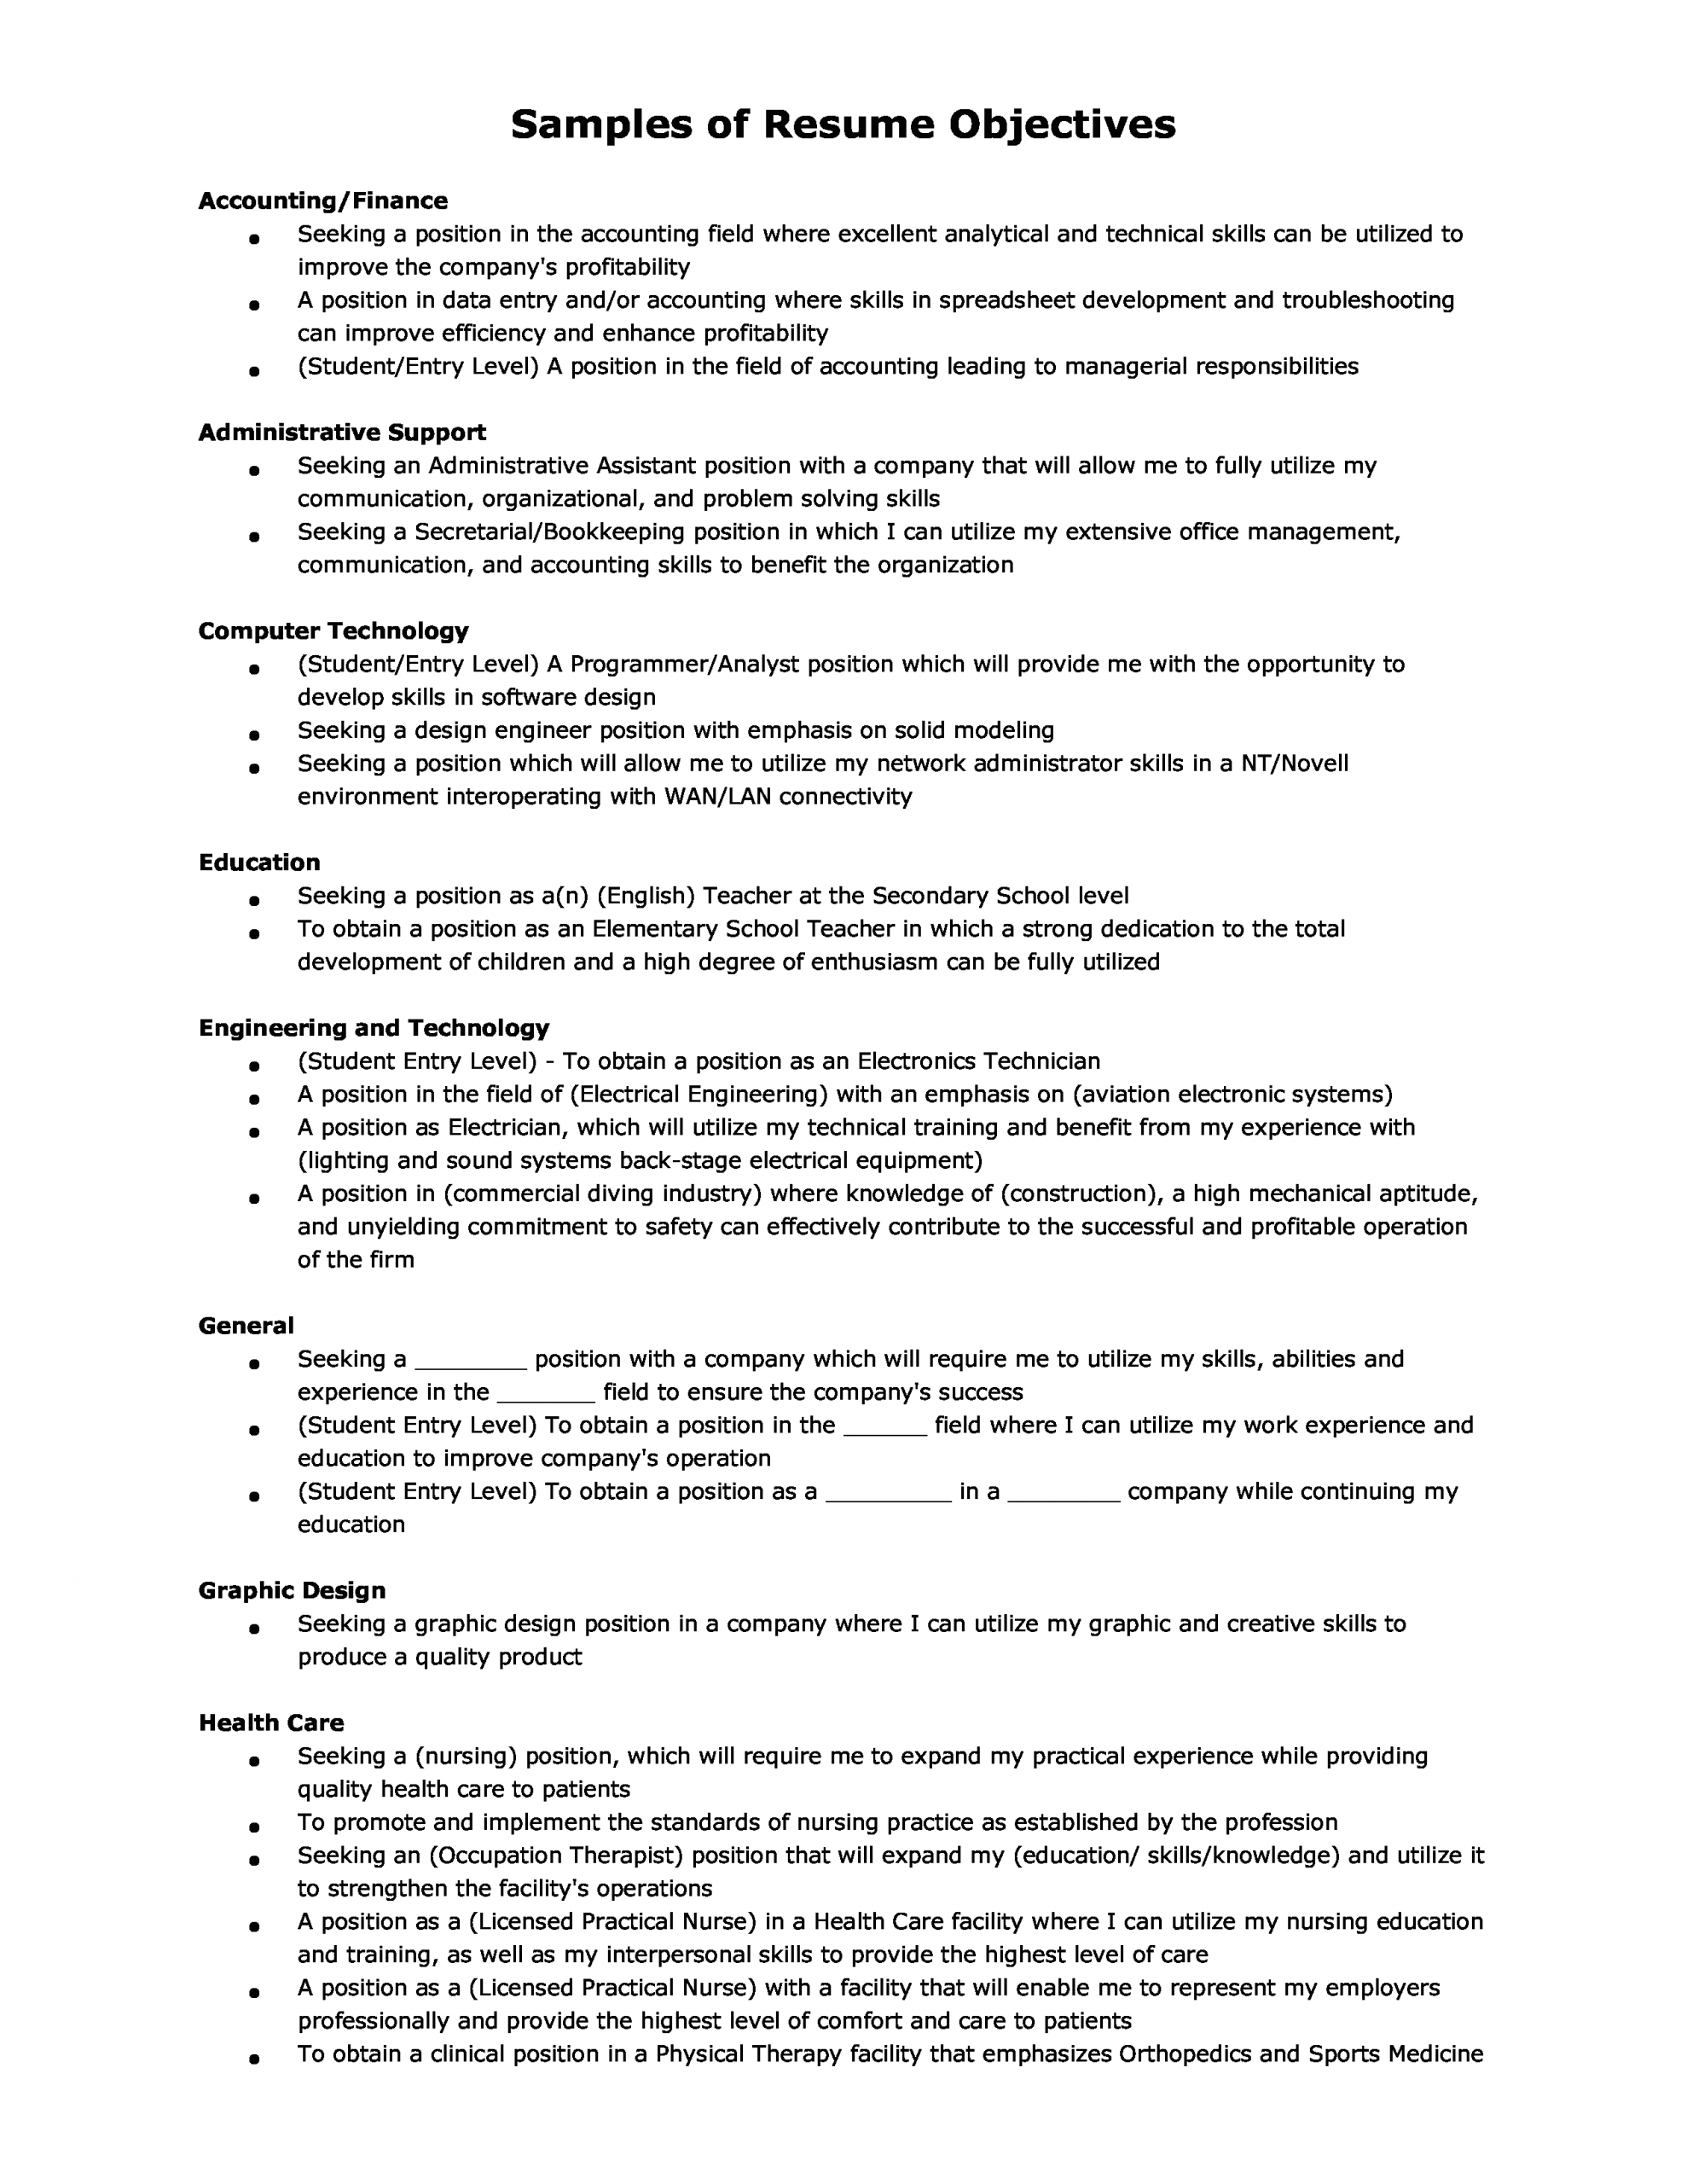 Resume Objective Samples for Experienced Professionals Professional Resume Objective How to Draft A